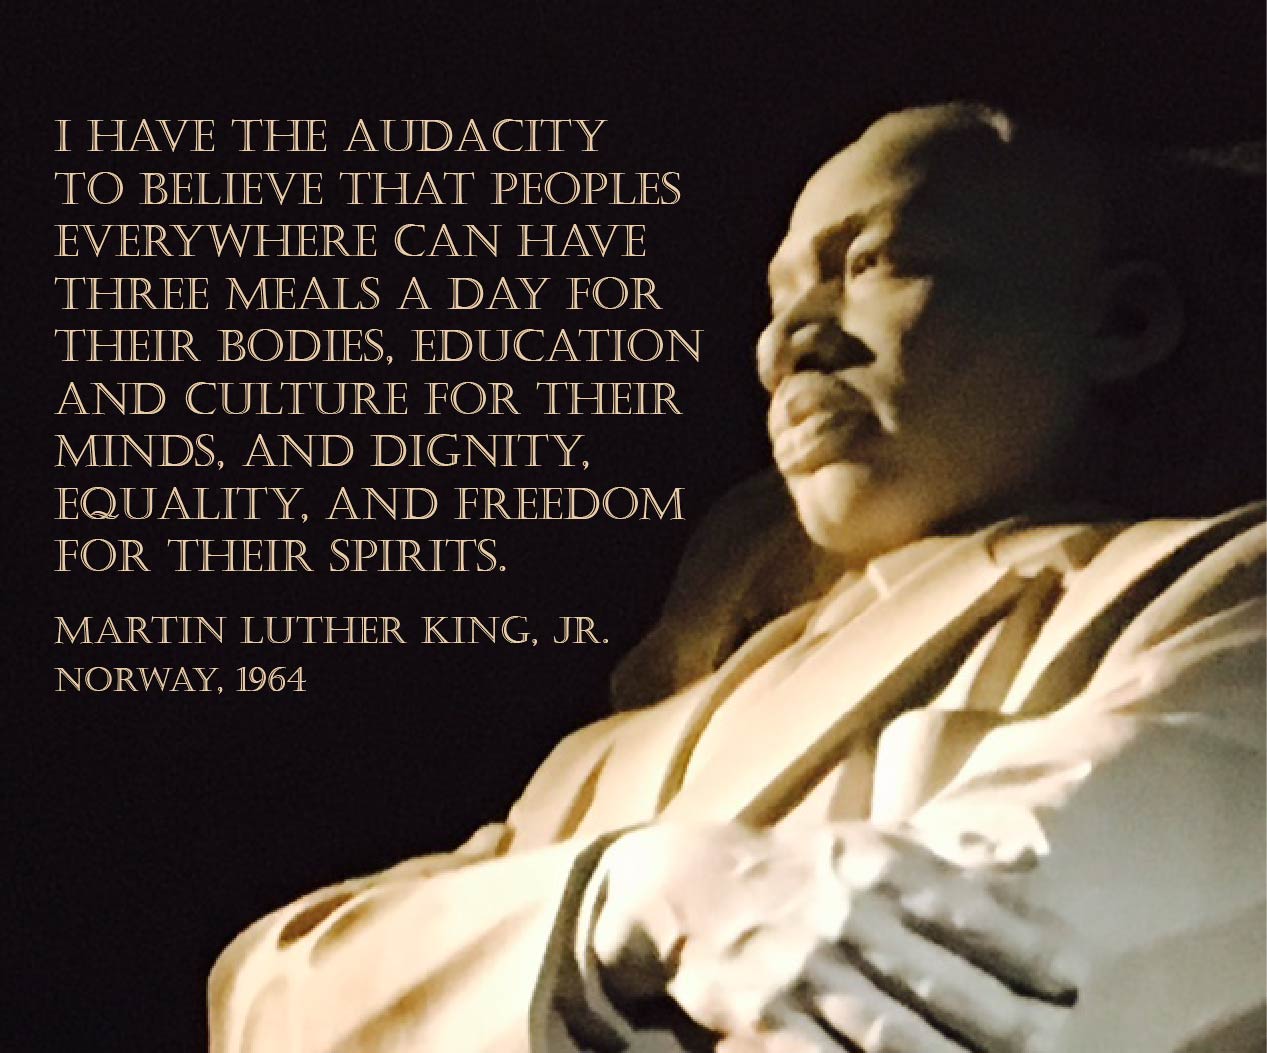 Poster with MLK quote: I have the audacity to belive that peoples everywhere can have three meals a day for their bodies, education and culture for their minds, and dignity, equality, and freedom for their spirits.